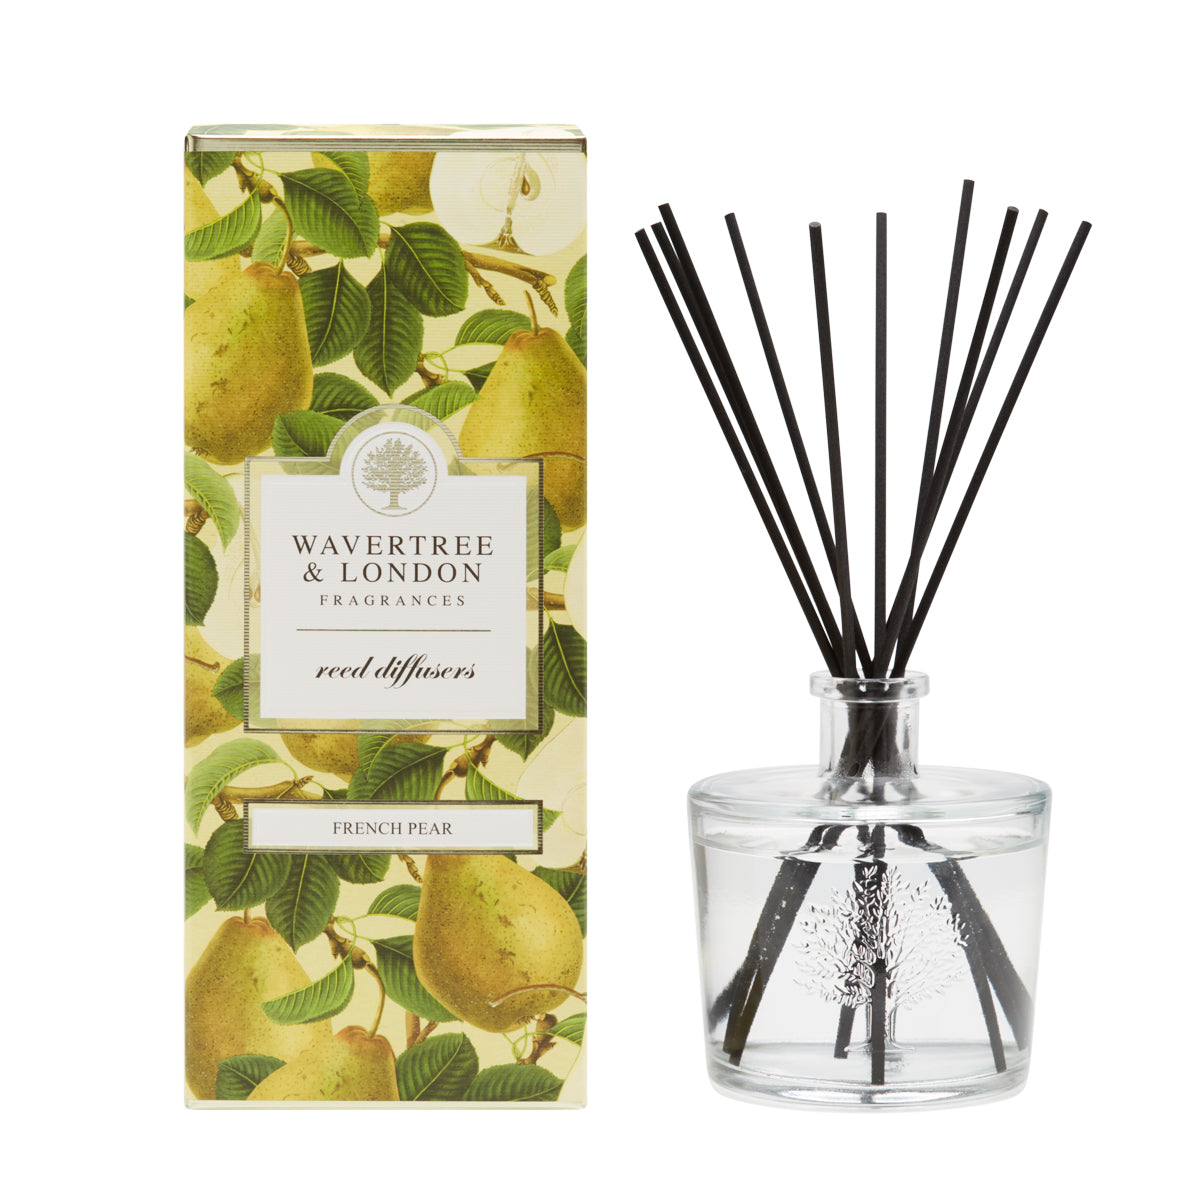 French Pear Diffuser Wavertree and London